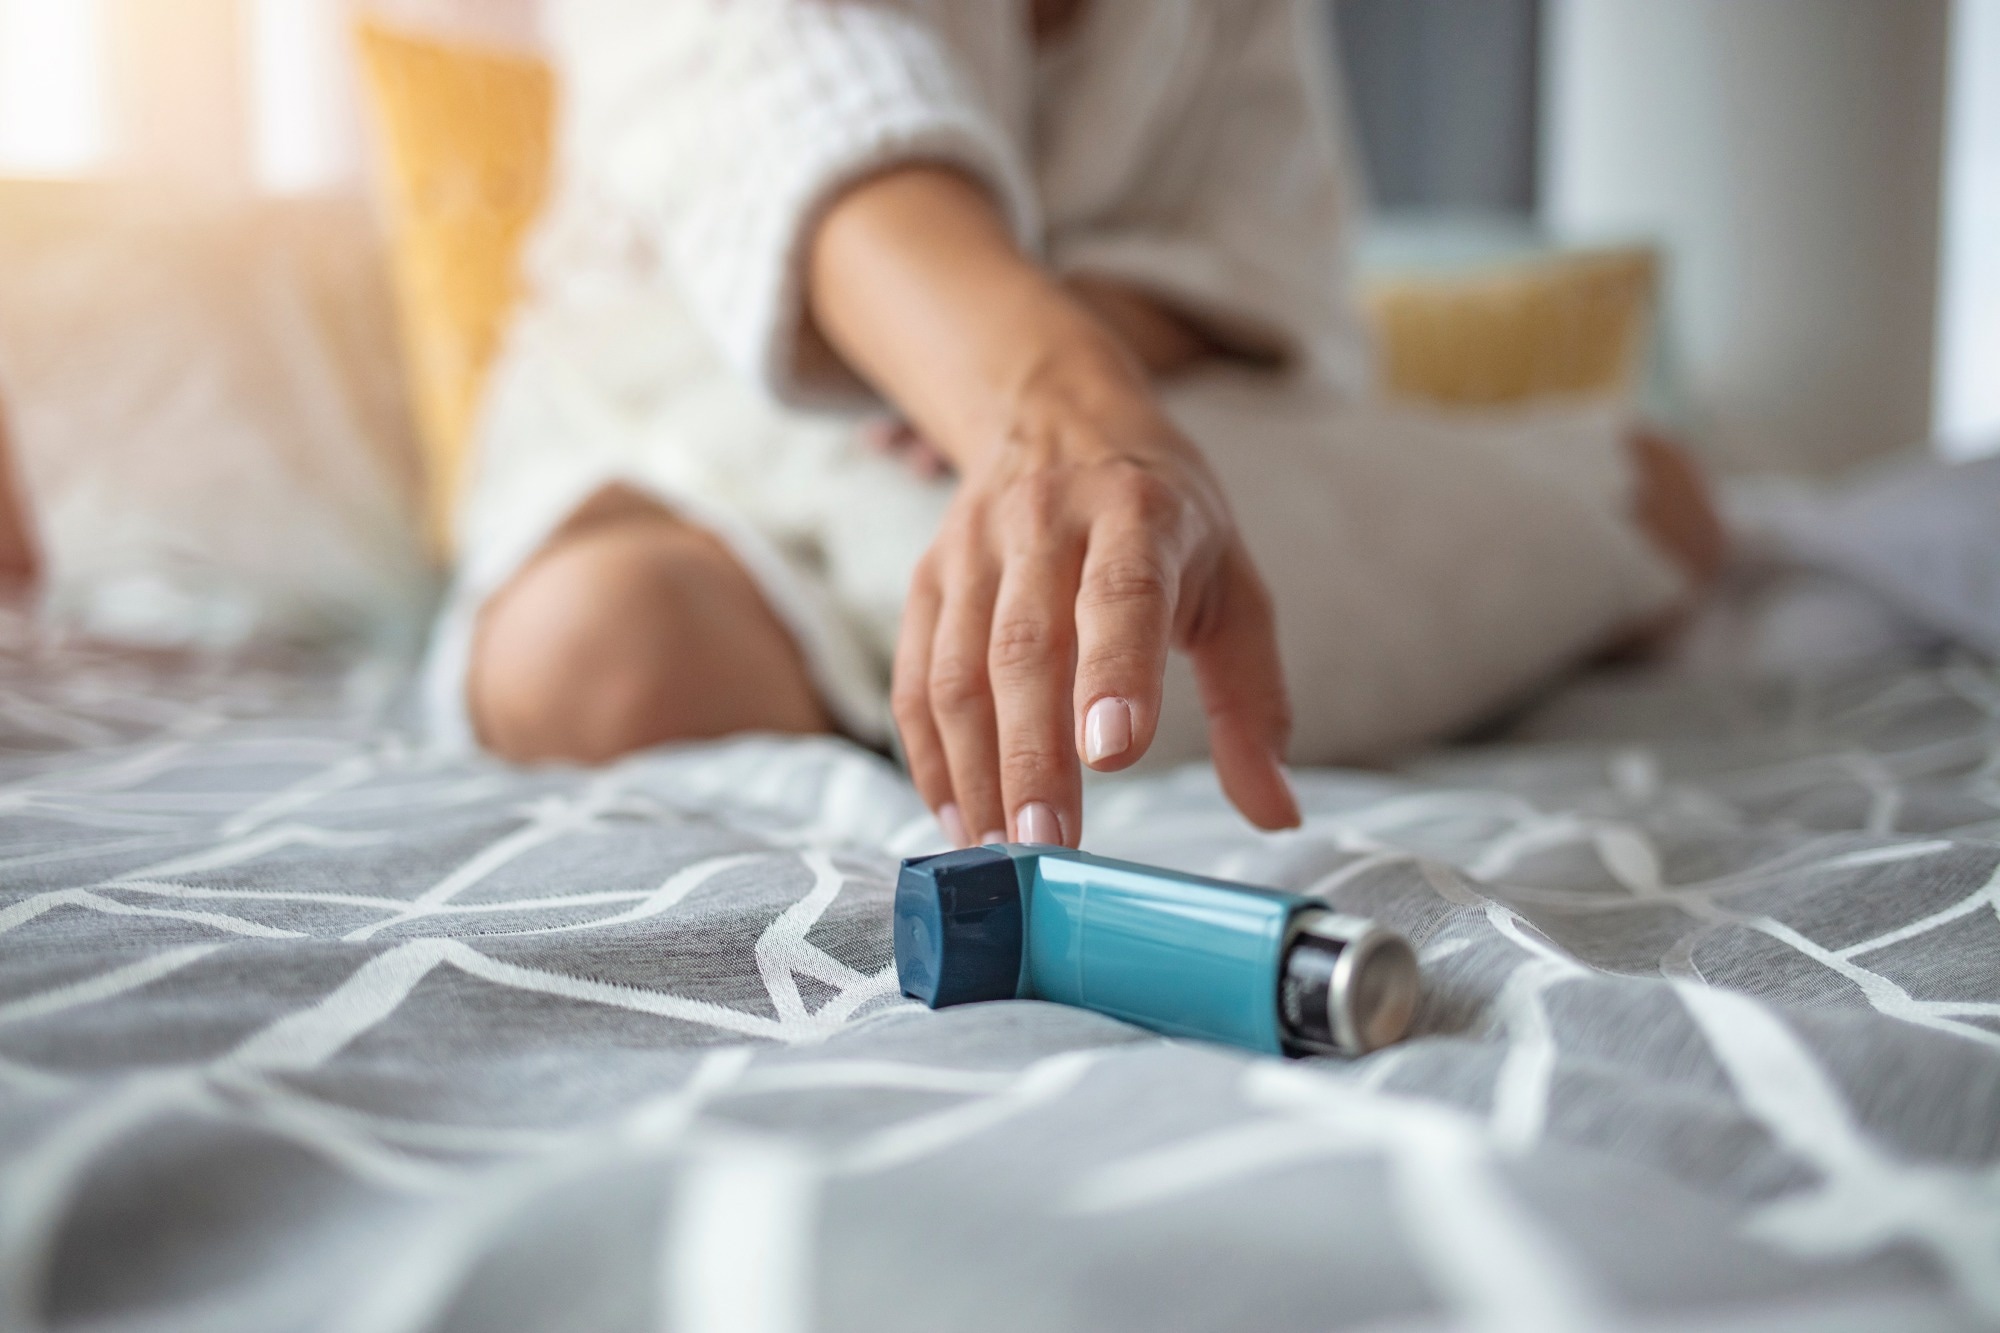 Study: A systematic review of questionnaires measuring asthma control in children in a primary care population. Image Credit: DraganaGordic/Shutterstock.com